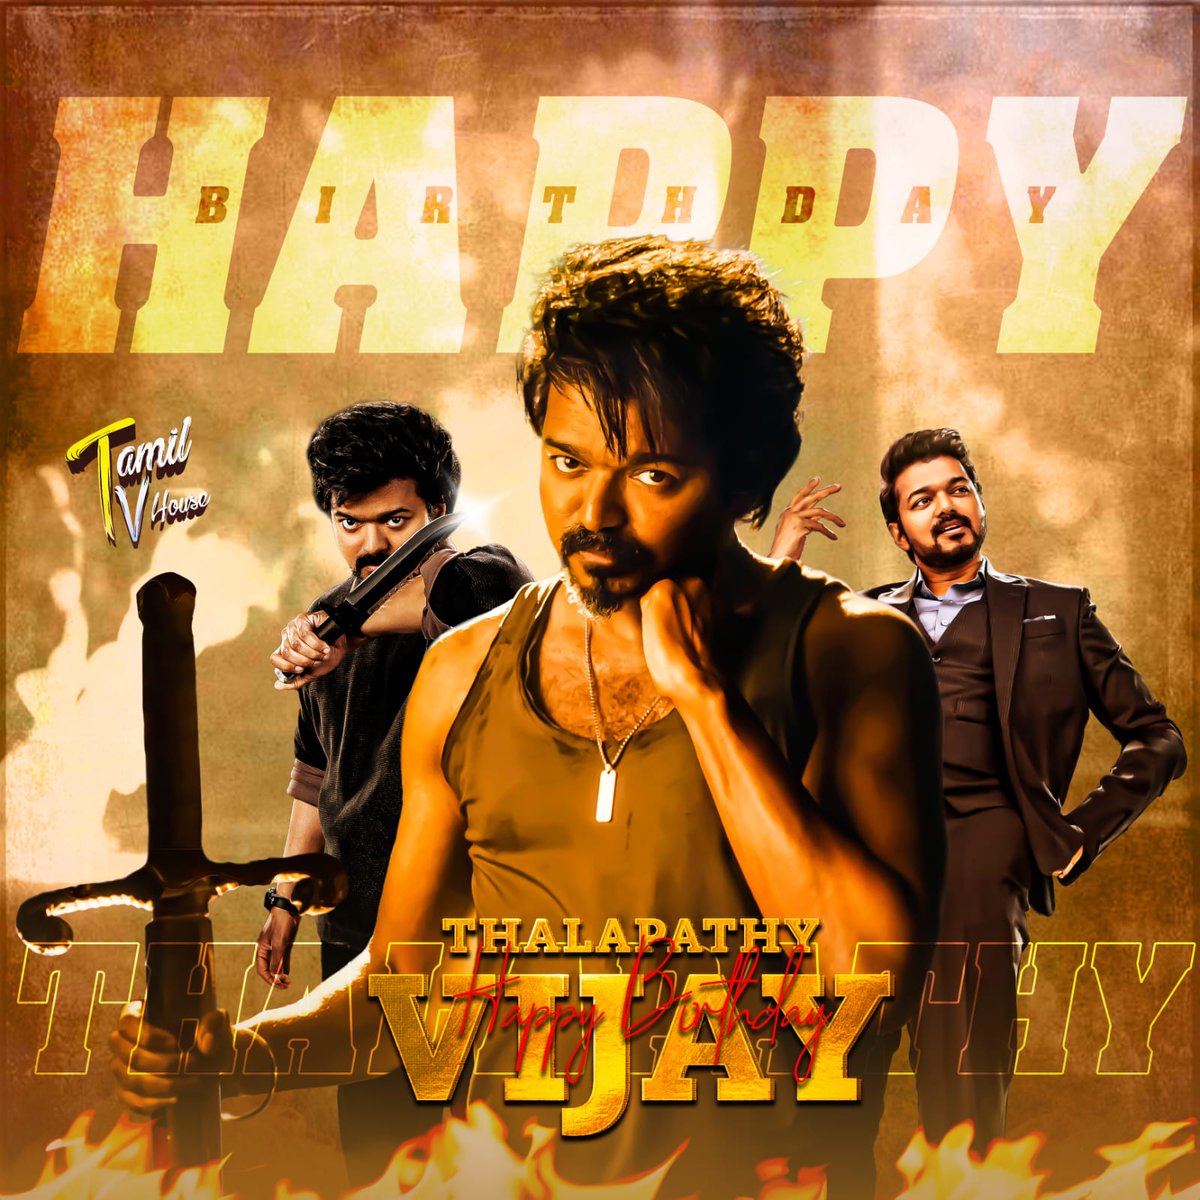 Happy to release the CDP designed by @tamiltvhouse
Wishing the self challenger of Tamil cinema 
Advance Happy Birthday #ThalapathyVijay 🎂 

#SAISANGO #TAMILTVHouse 
#HappyBirthdayThalapathy #HBDThalapathy
#HBDThalapathyvijay #ThalapathyVIJAYBdayCDP #ThalapathyVijayBirthday